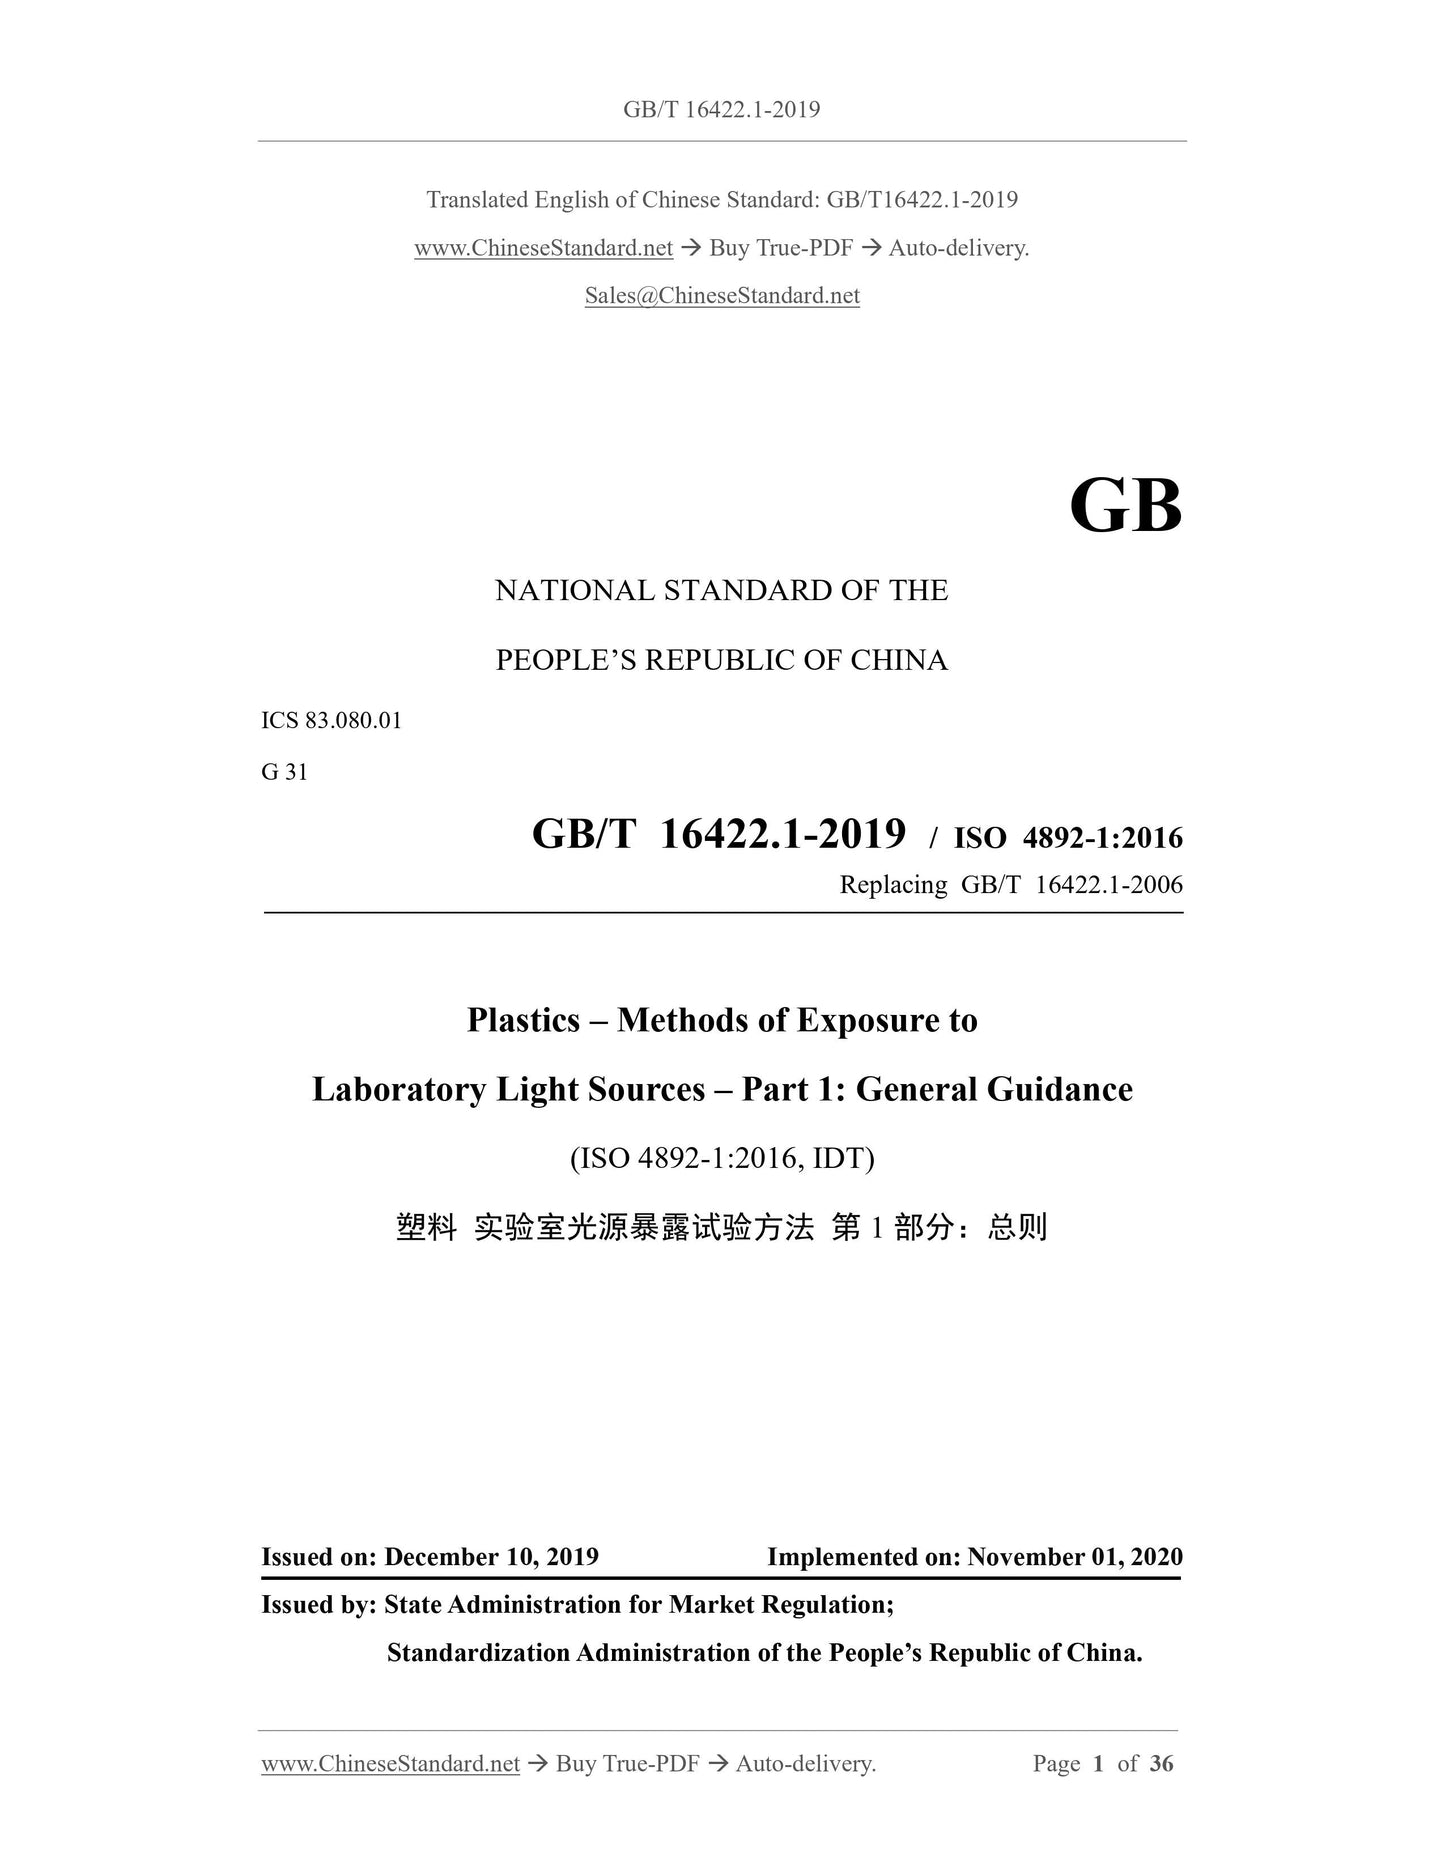 GB/T 16422.1-2019 Page 1